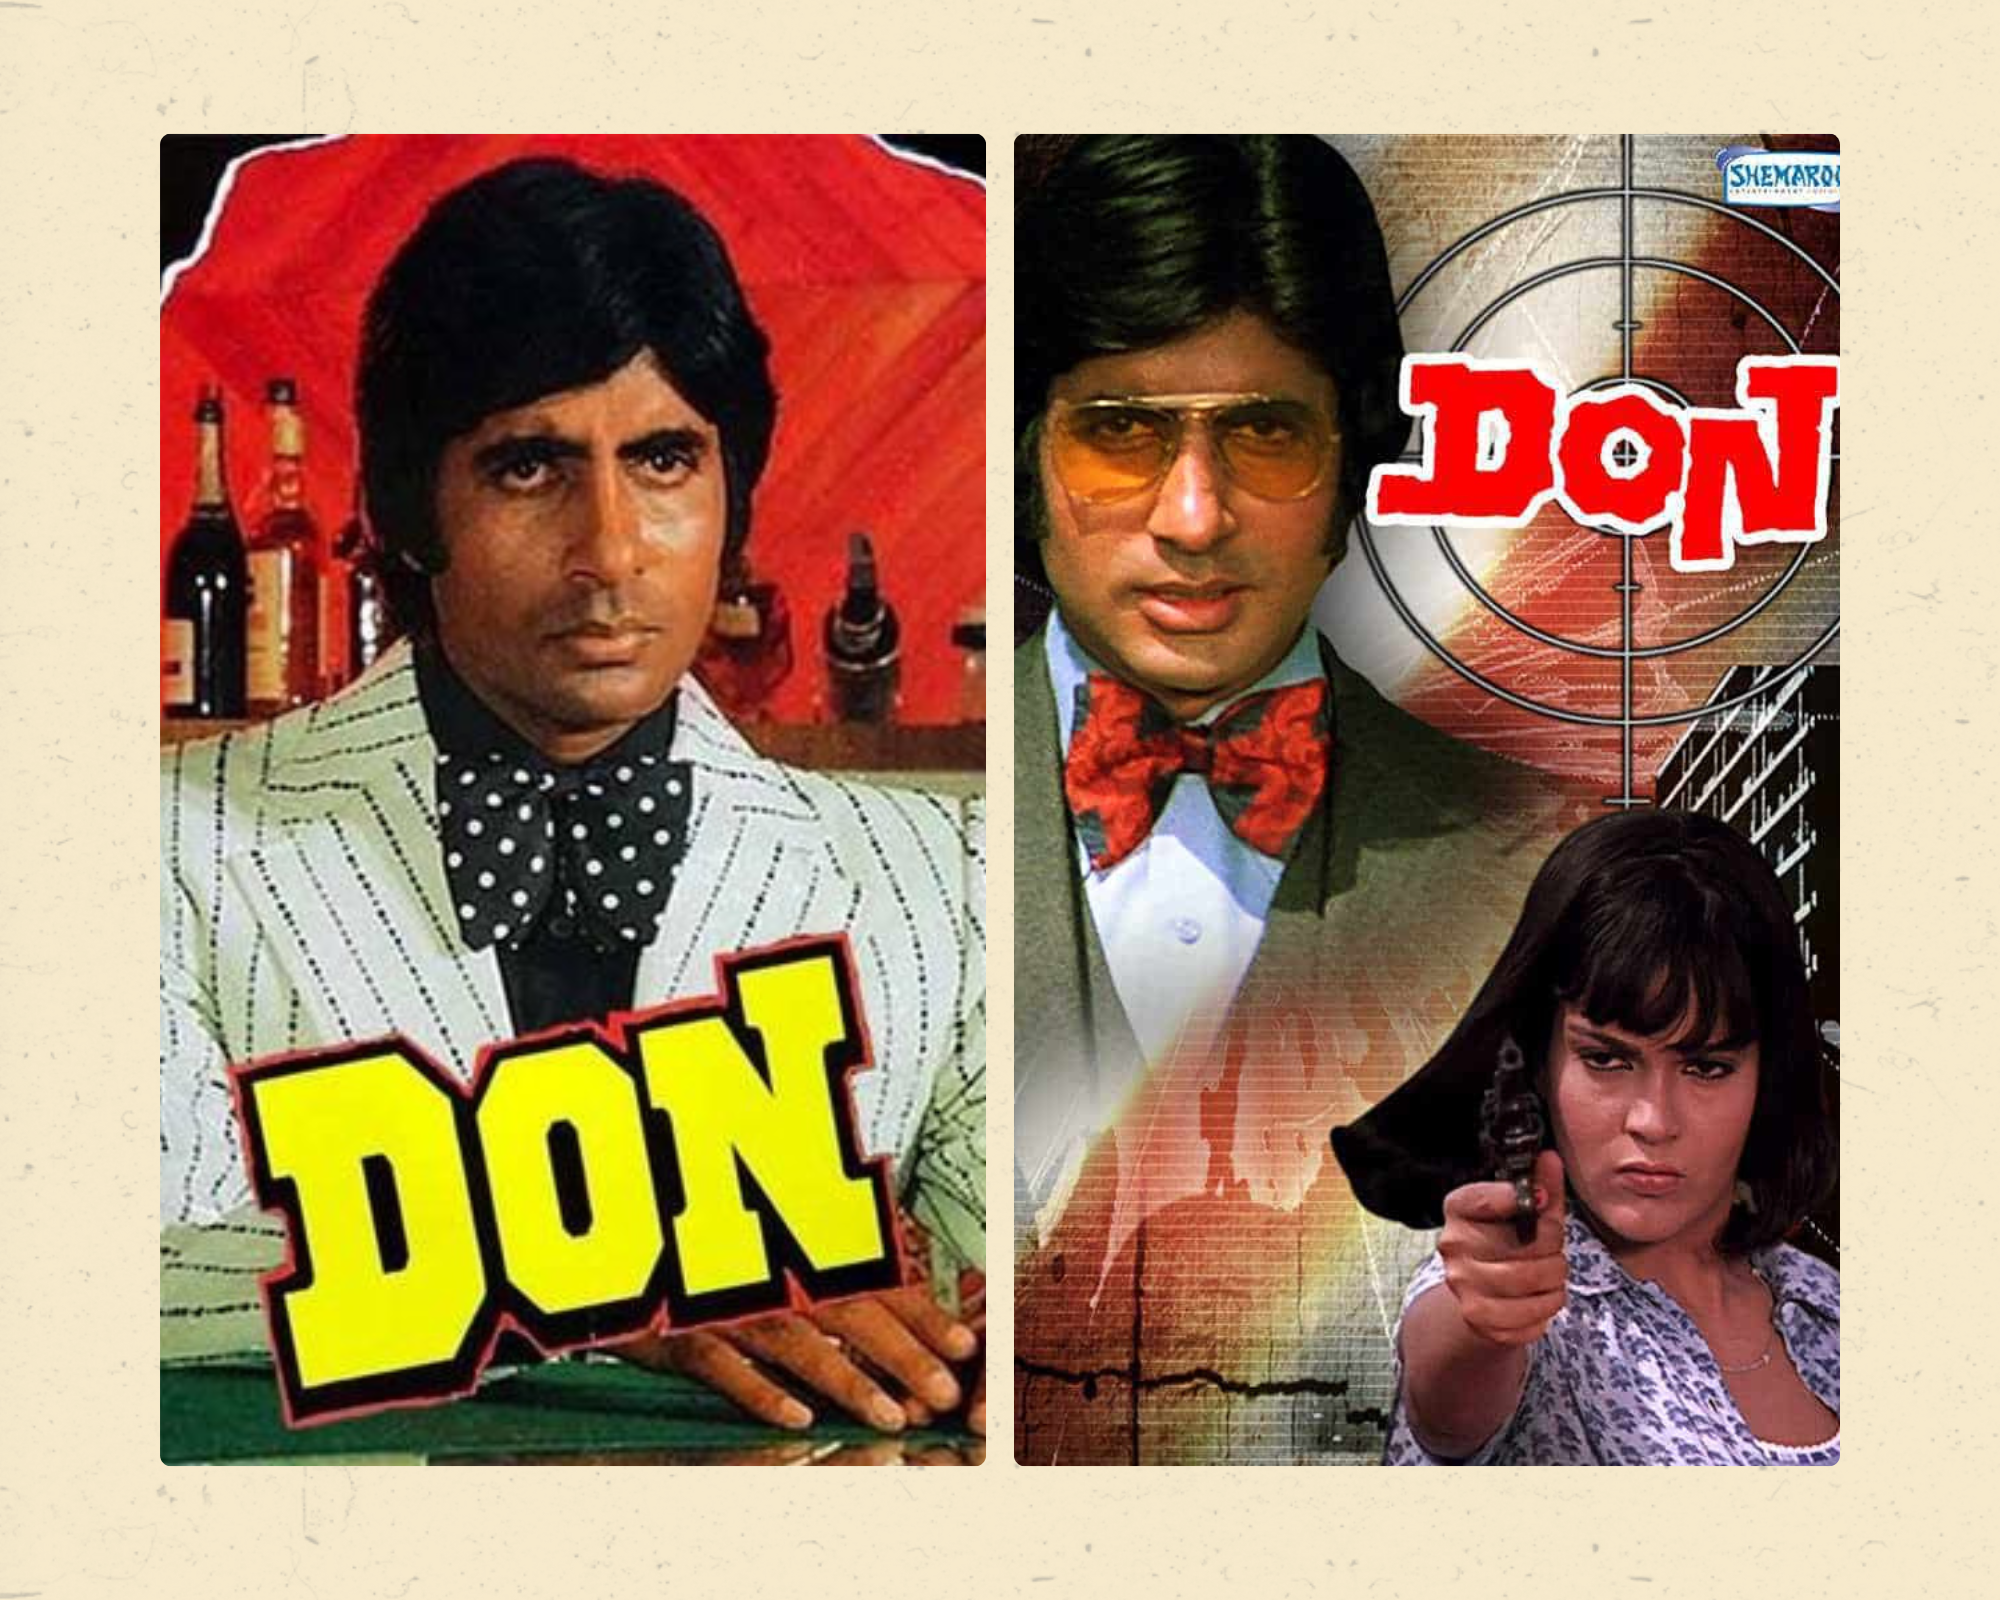 45 Years Of ‘Don’ And Its Impact On 21st Century.